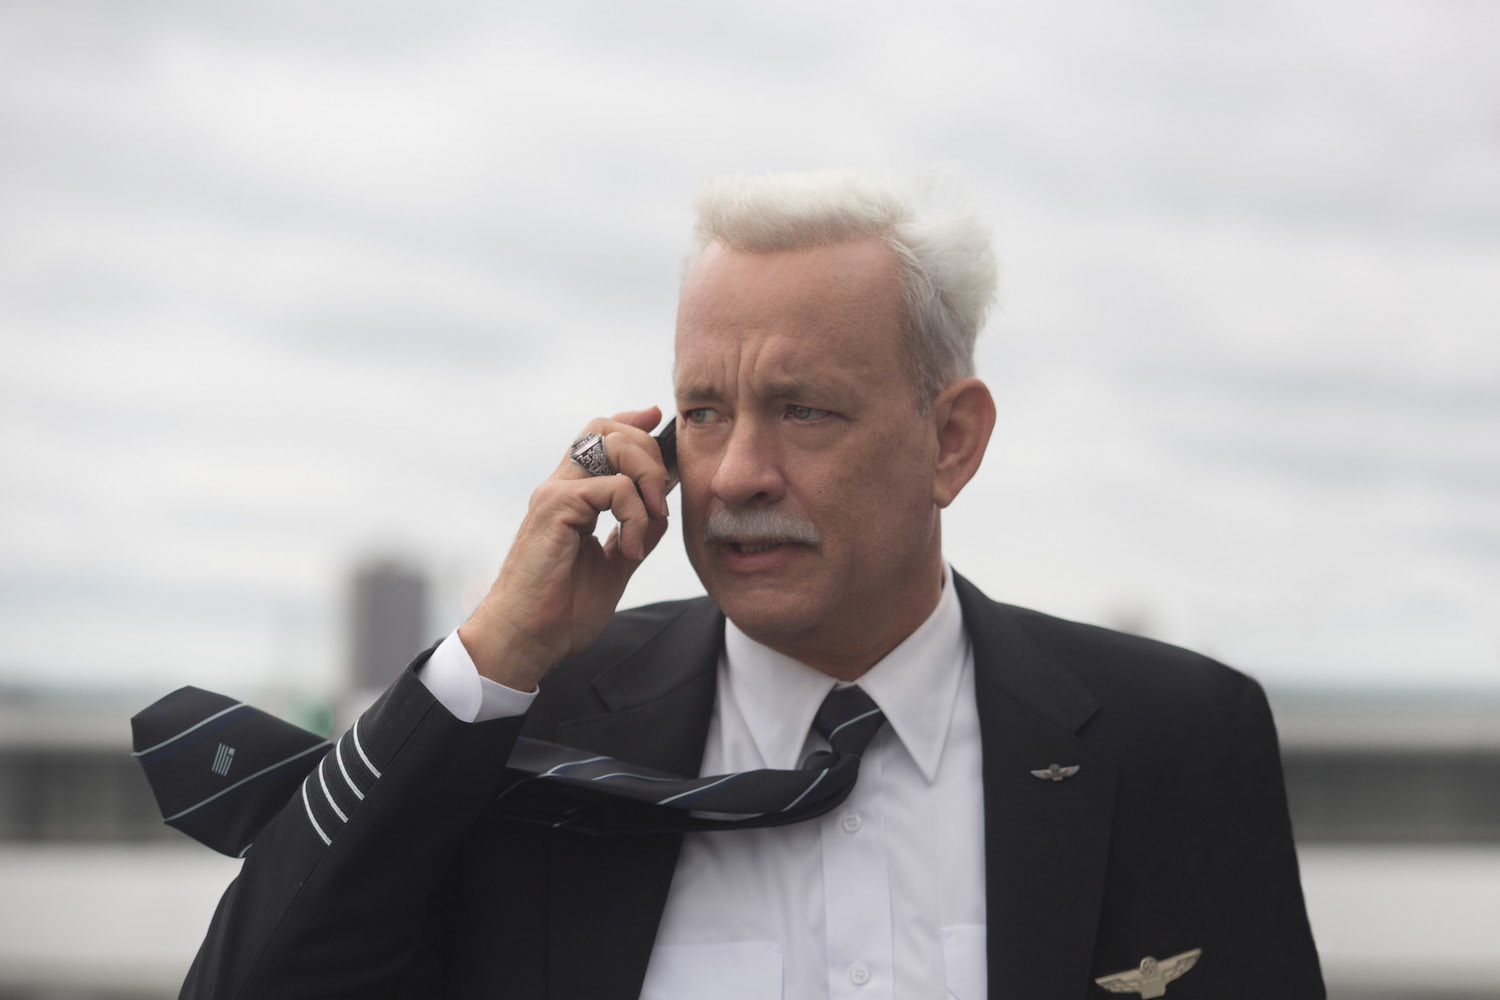 Clint Eastwood’s Miracle-on-the-Hudson Biopic, Sully, Bypasses the Brouhaha